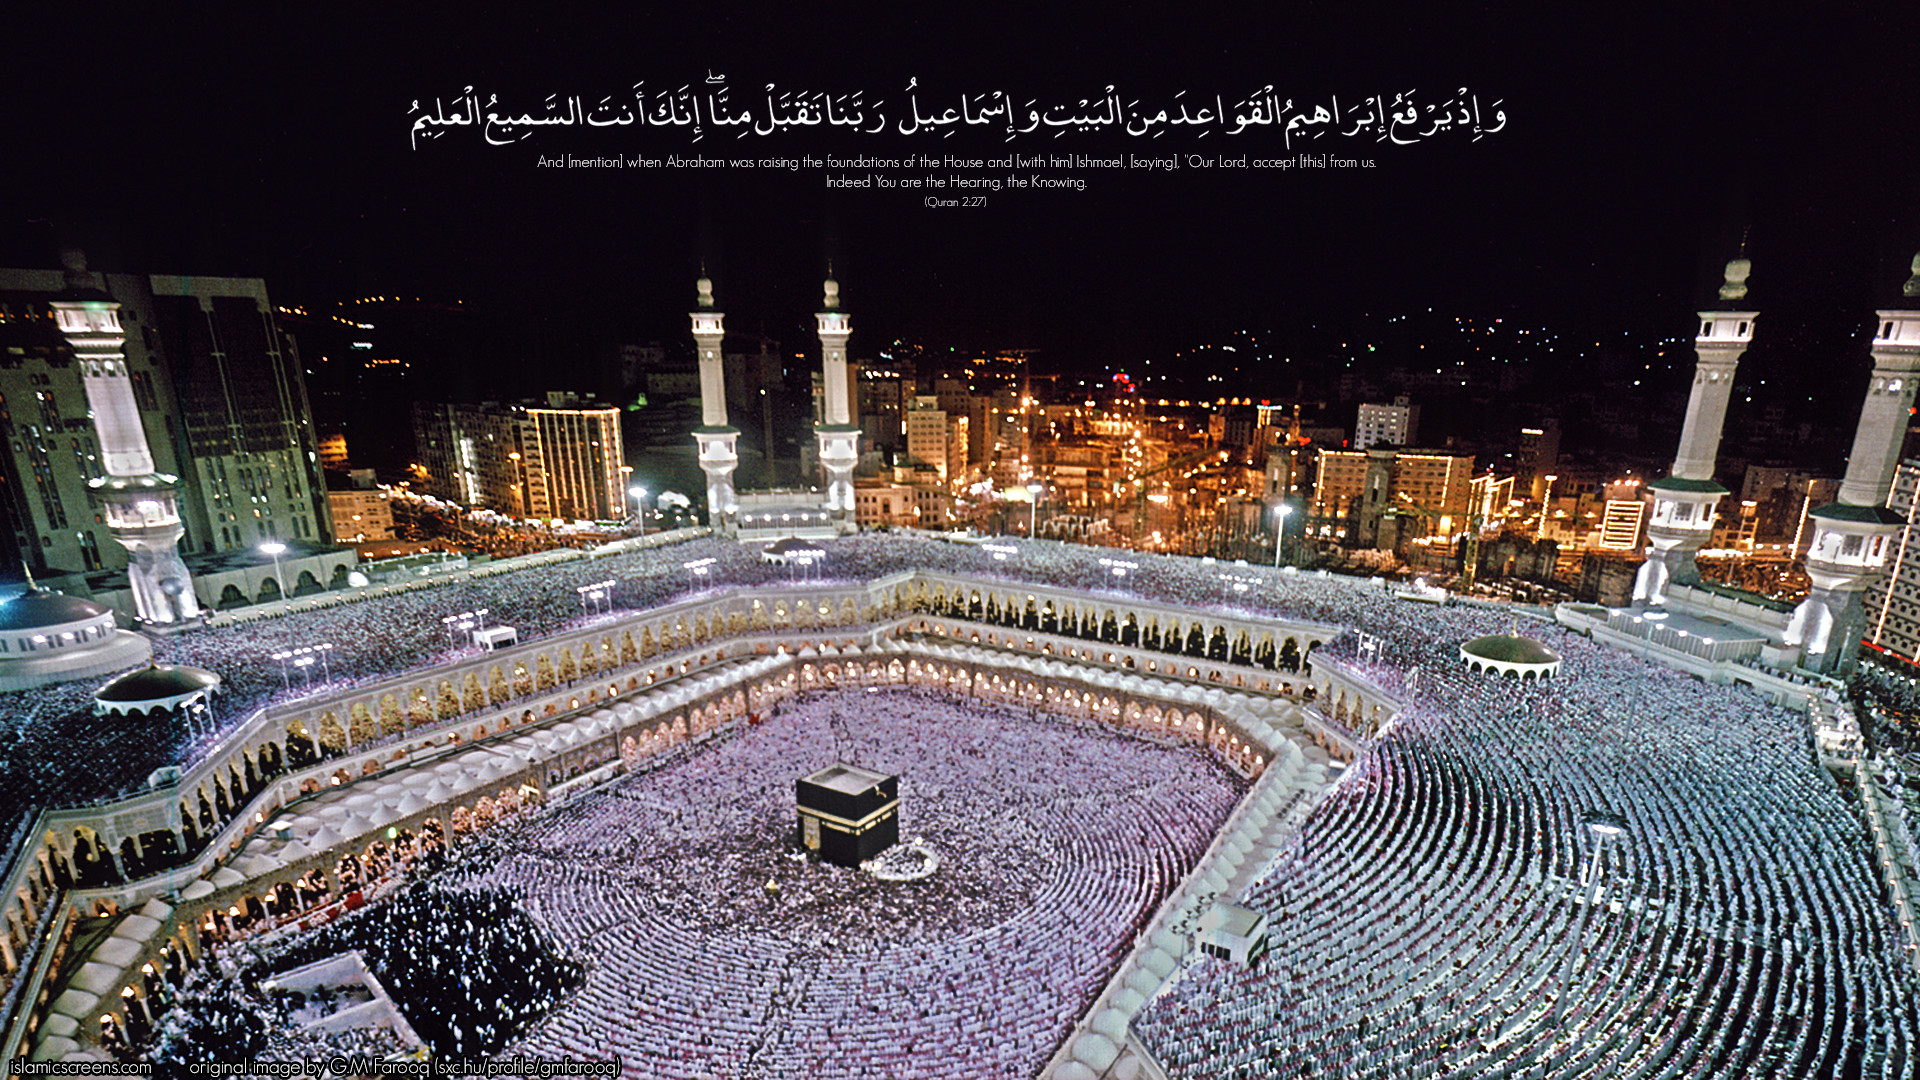 1920x1080 ... Mecca Makkah Beautiful Pictures wallpapers Photos Images .